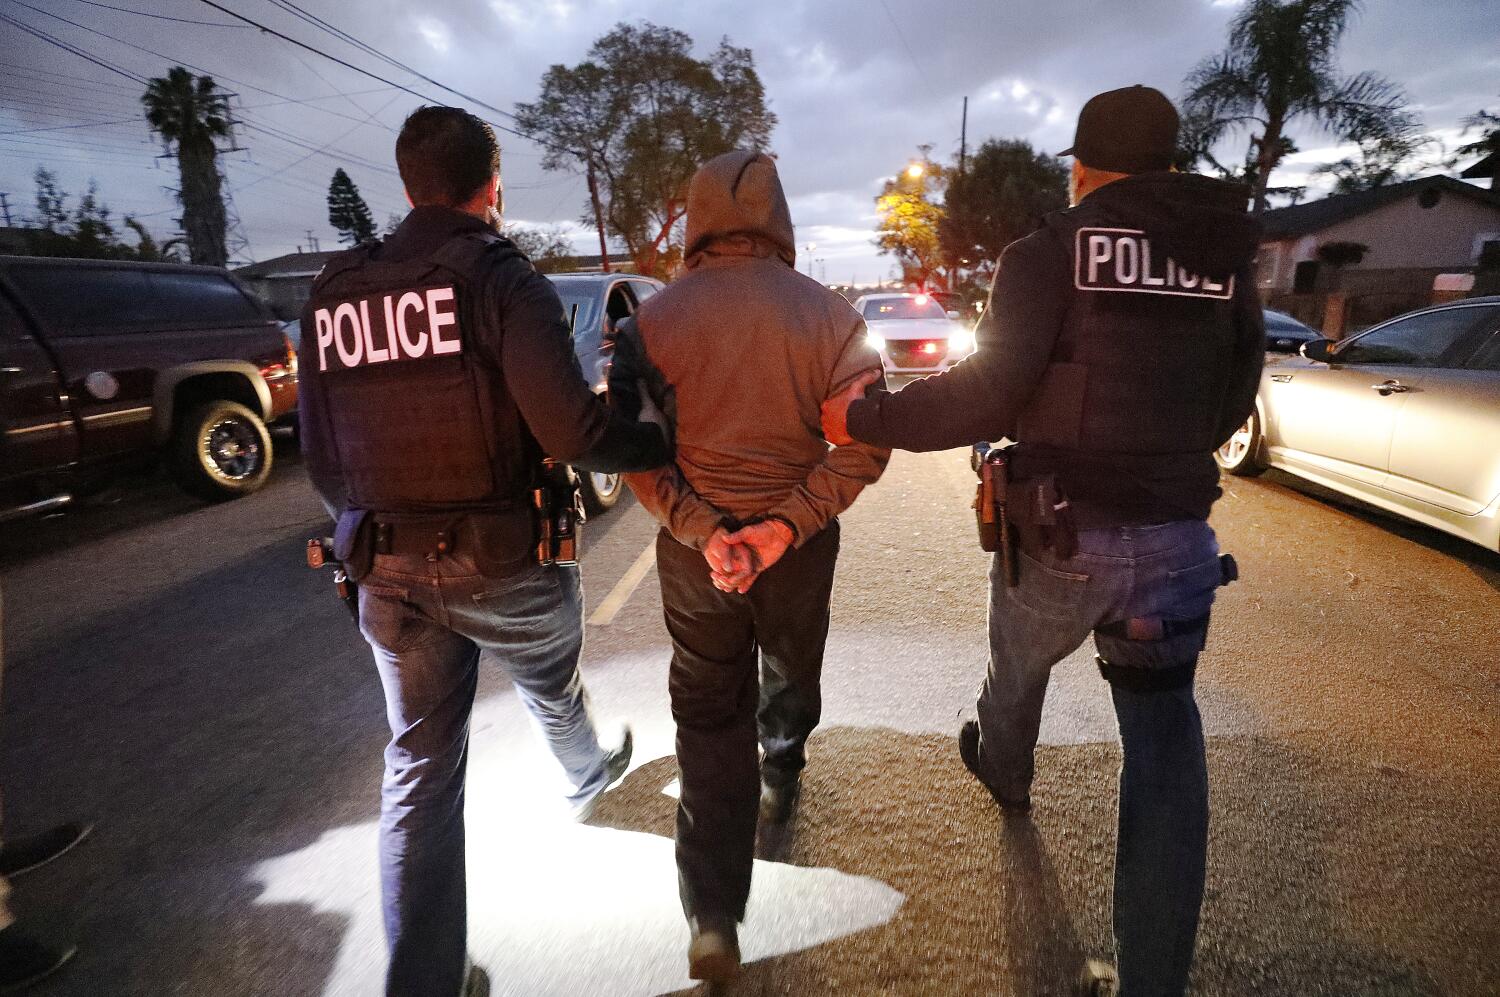 Federal judge orders ICE to end 'knock and talk' arrests of immigrants in Southern California